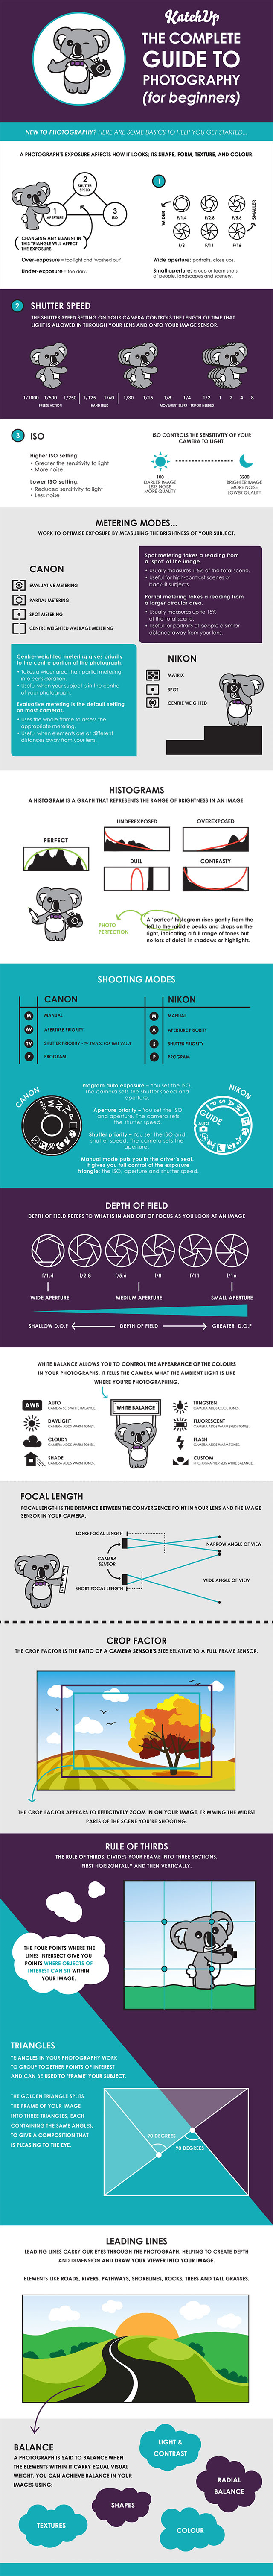 The Complete Guide To Photography - Useful Infographic For Beginners